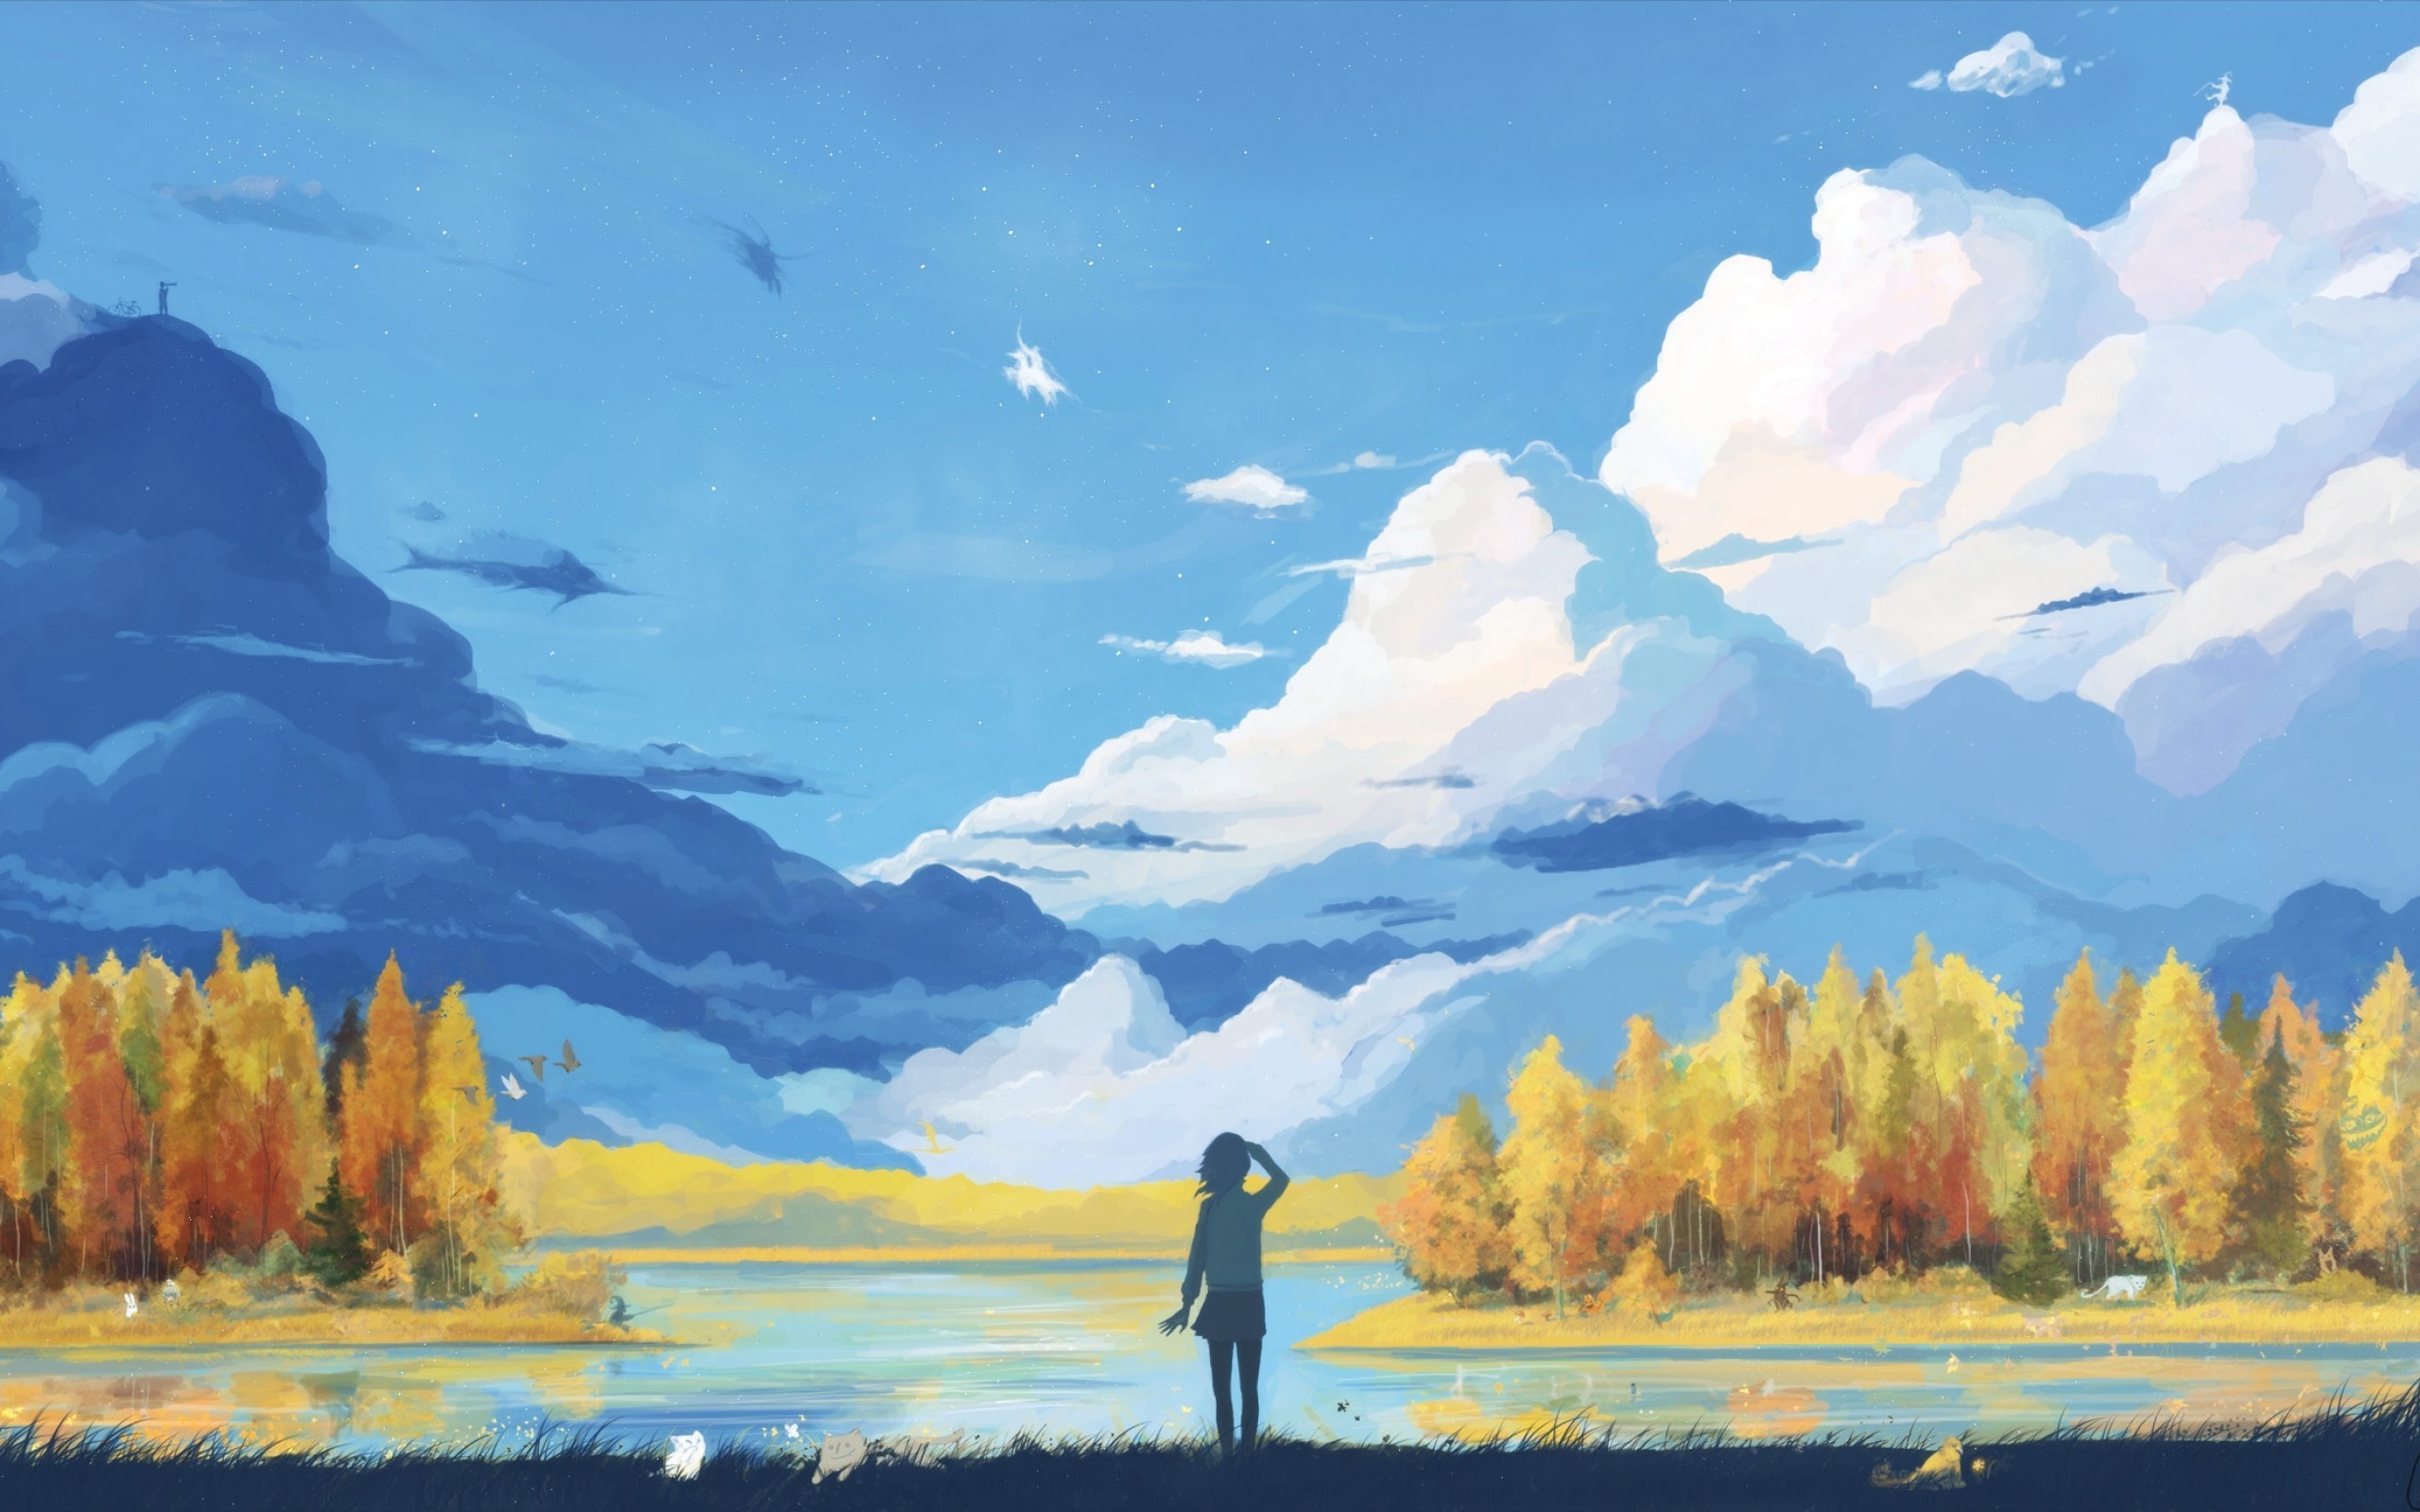 2560x1600 Anime landscape girl mountain relaxing trees clouds scenic jpg   Wallpaper lives peaceful anime coverr picturesque